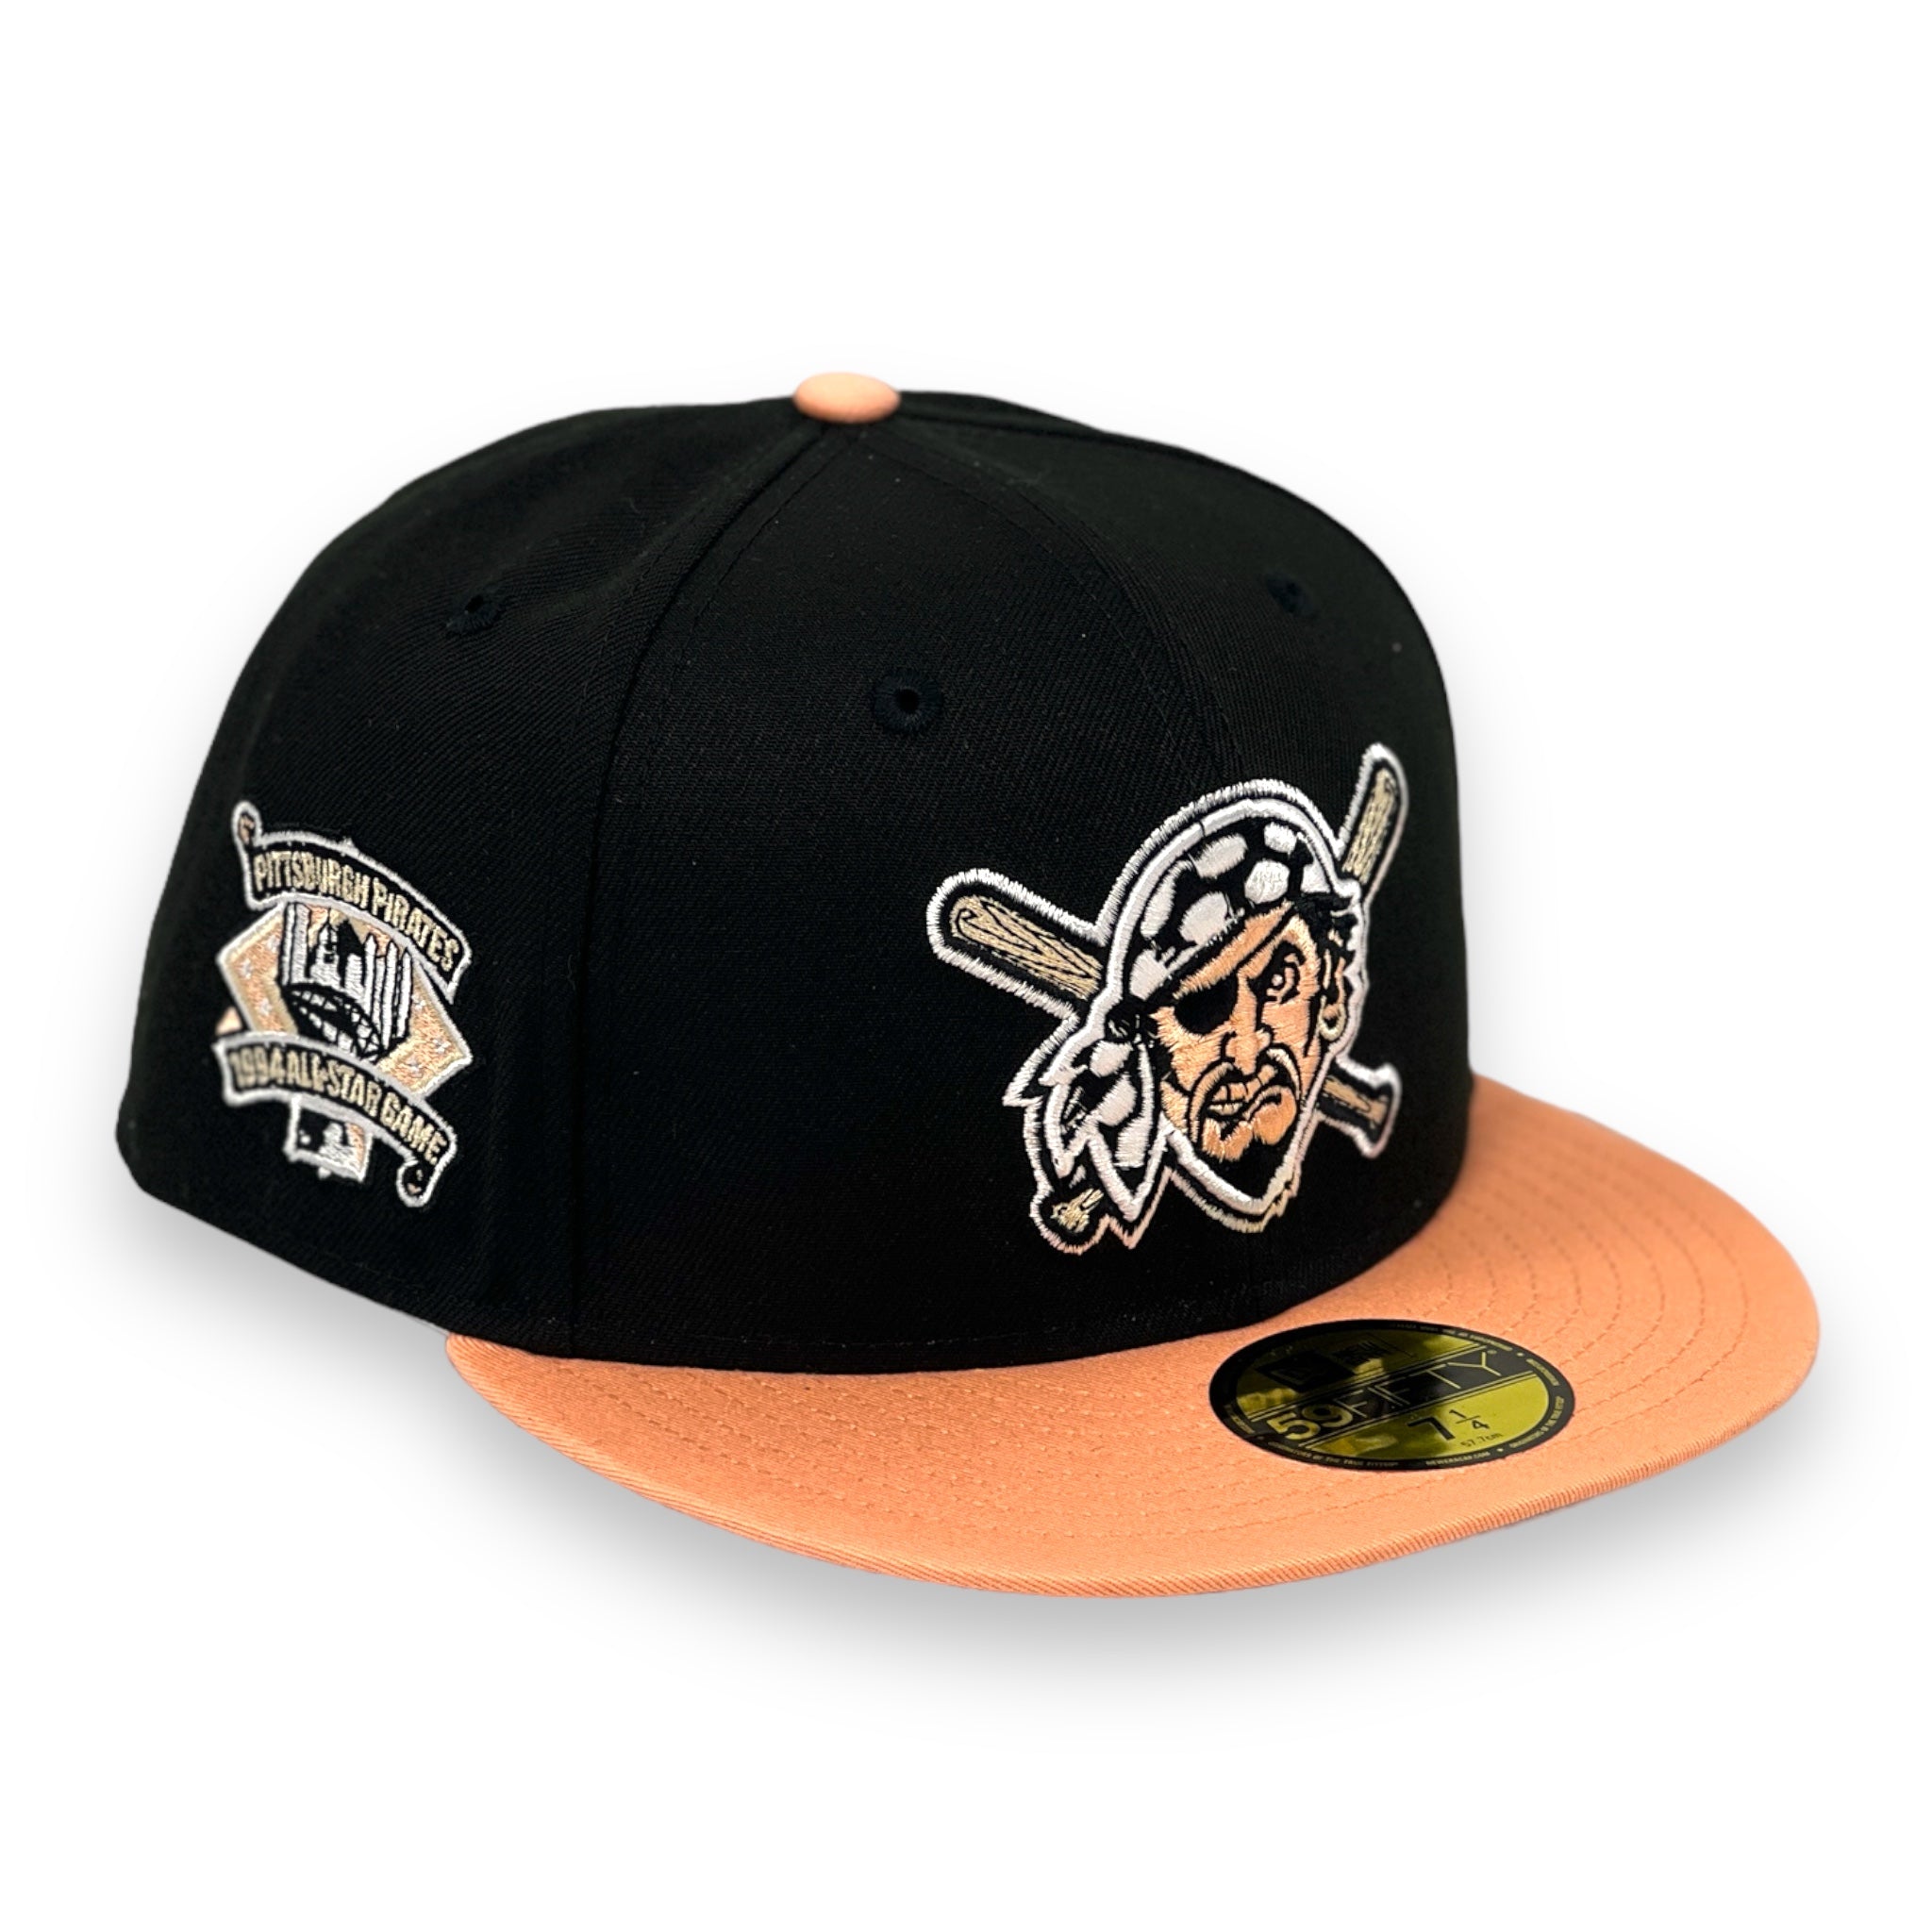 PITTSBURGH PIRATES (BLK/PEACH) (1994 ALLSTARGAME) NEW ERA 59FIFTY FITTED